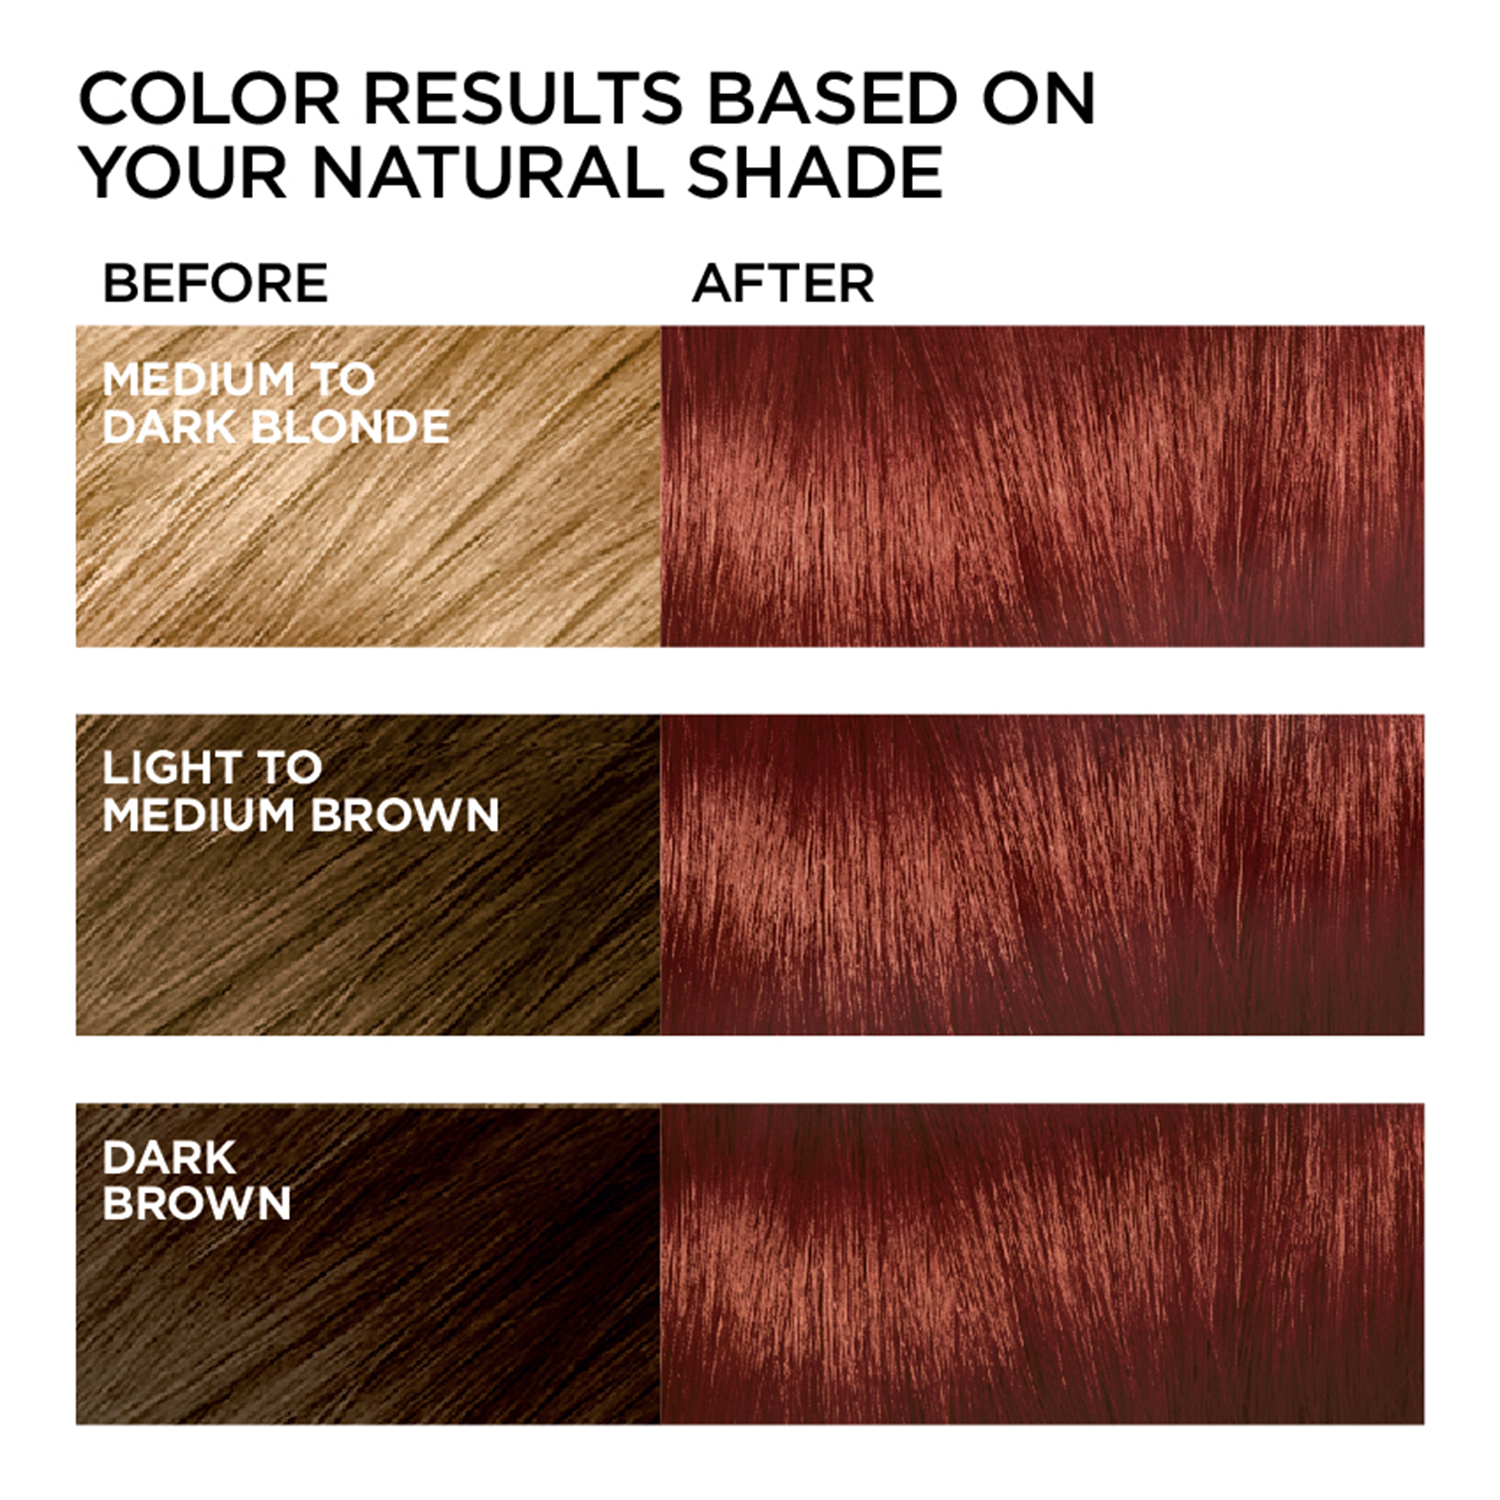 L'Oreal Paris Feria Multi-Faceted Shimmering Permanent Hair Color Kit, R68 Ruby Rush - image 4 of 9